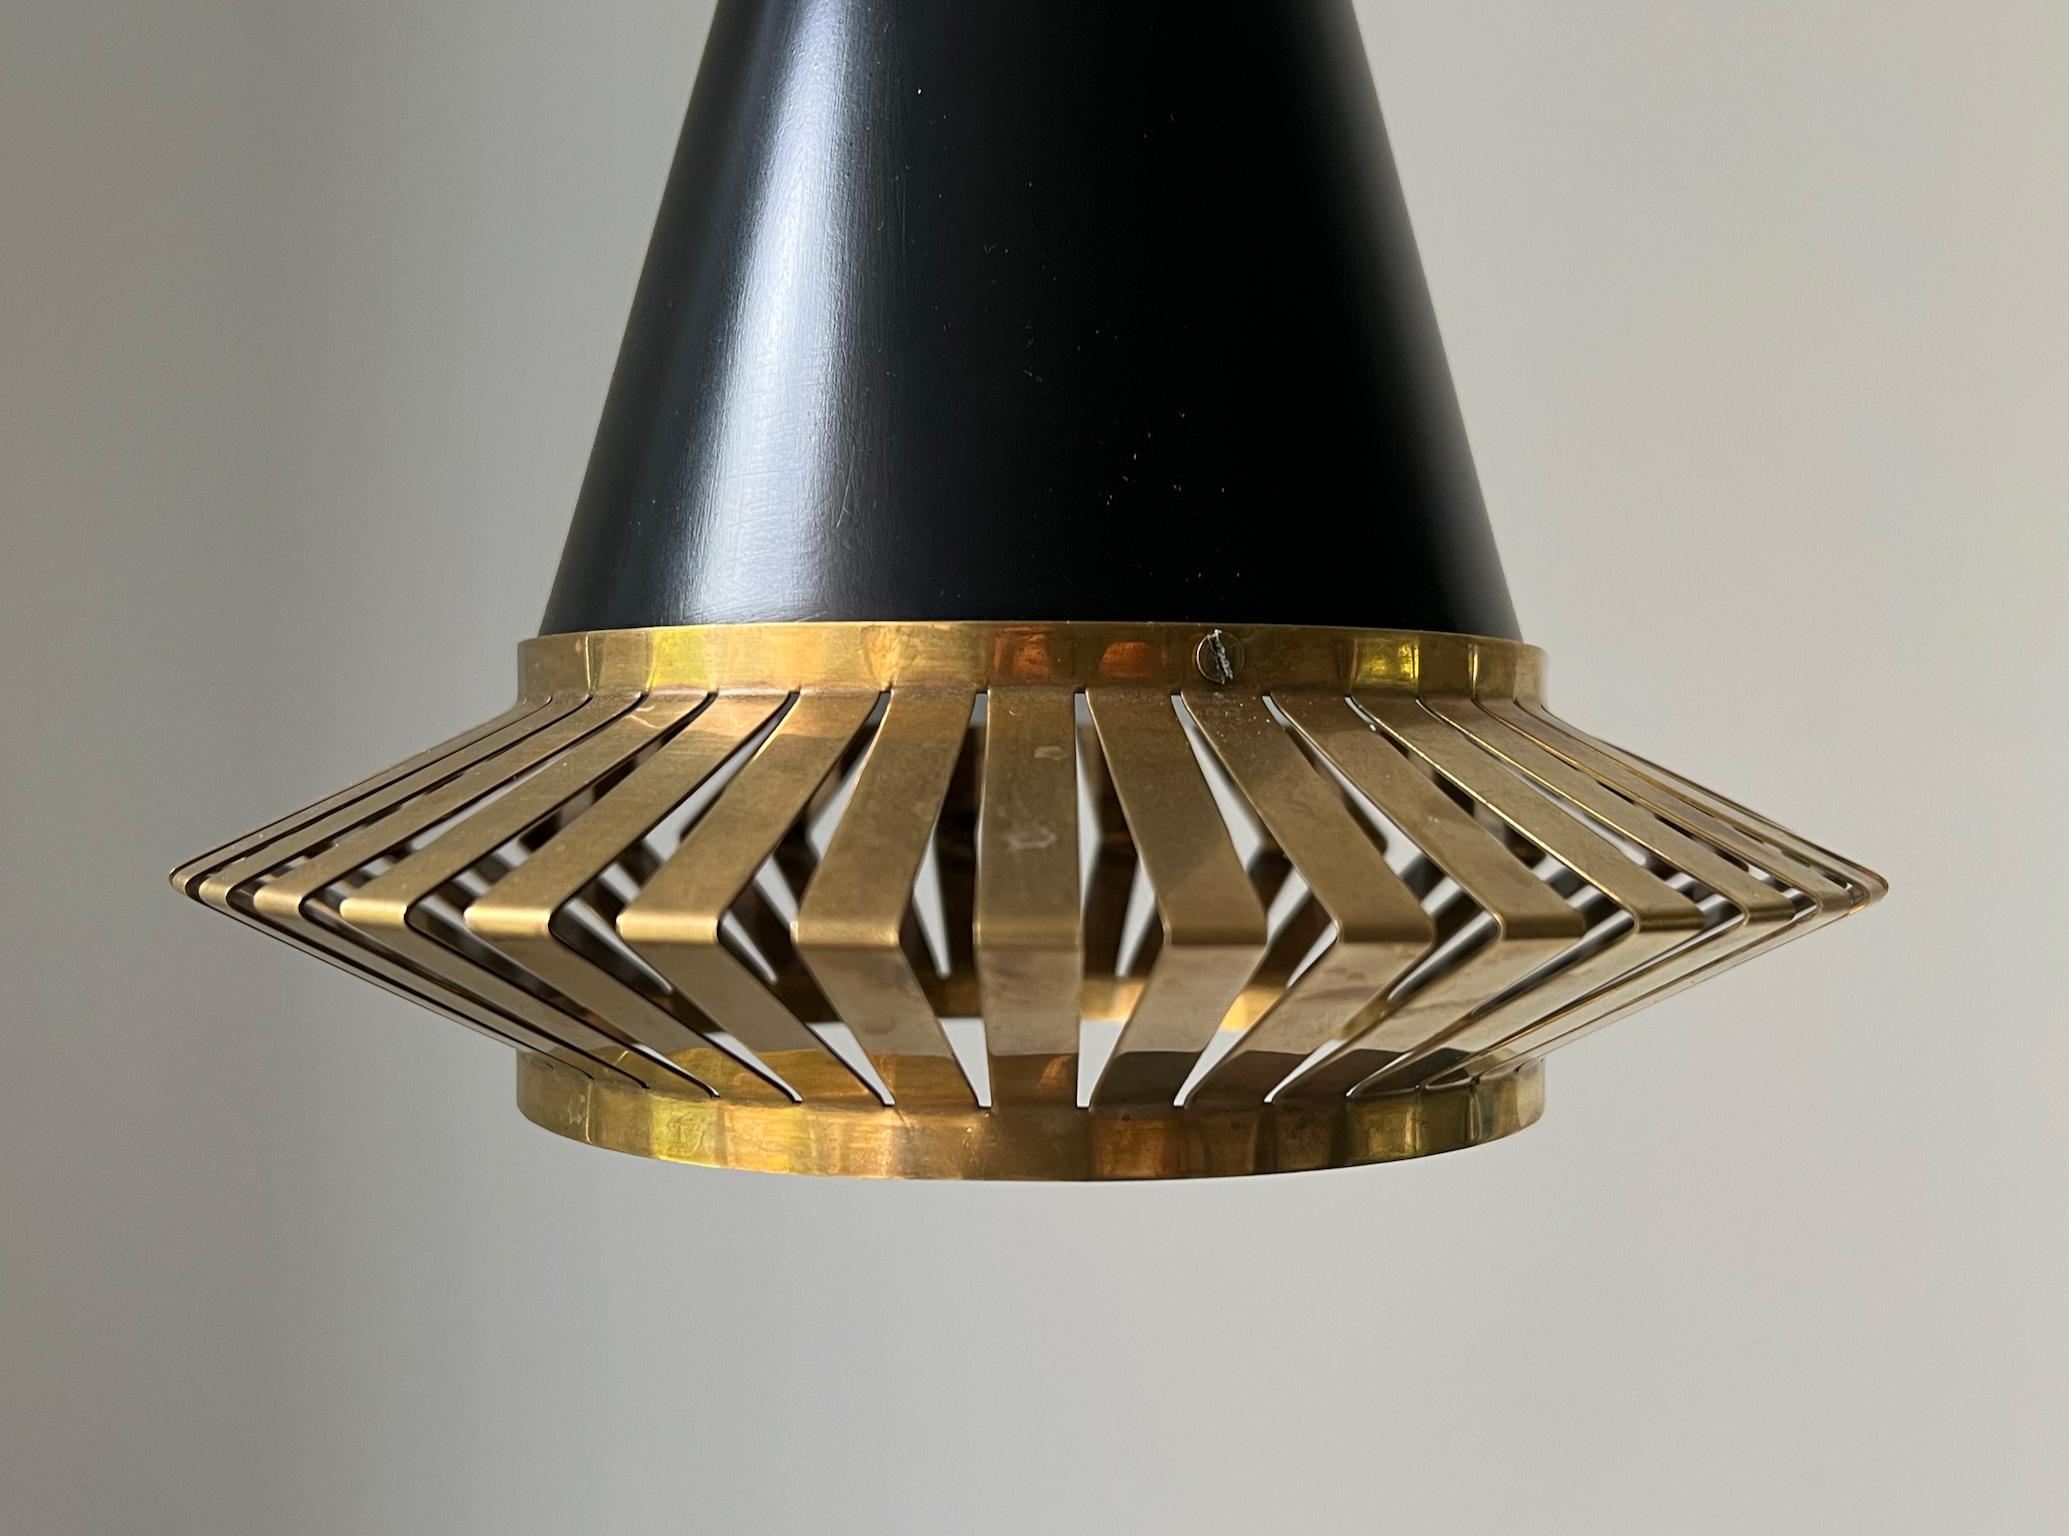 Metal Pendant Lamp Model K 2-1 by Maria Lindeman for Idman of Finland Mid-20th Century For Sale